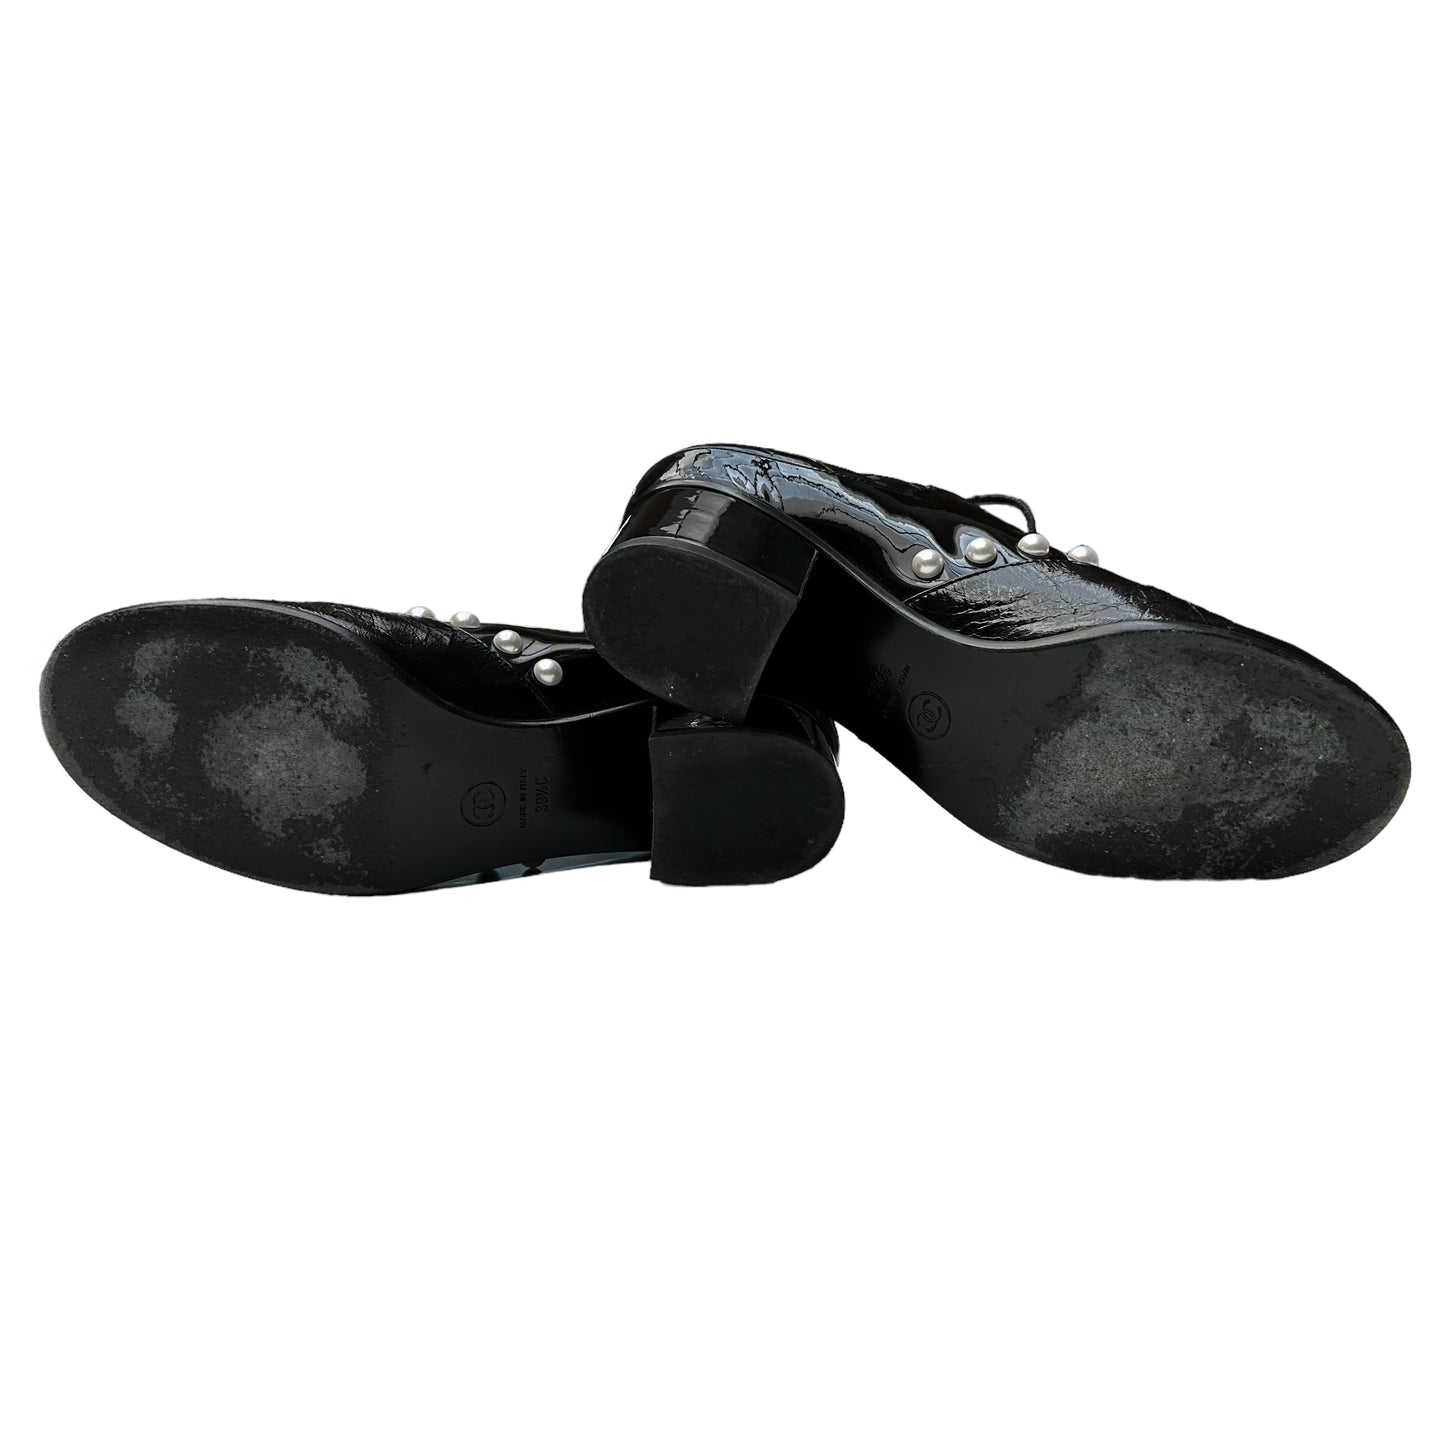 Black Patent Loafers - 9.5